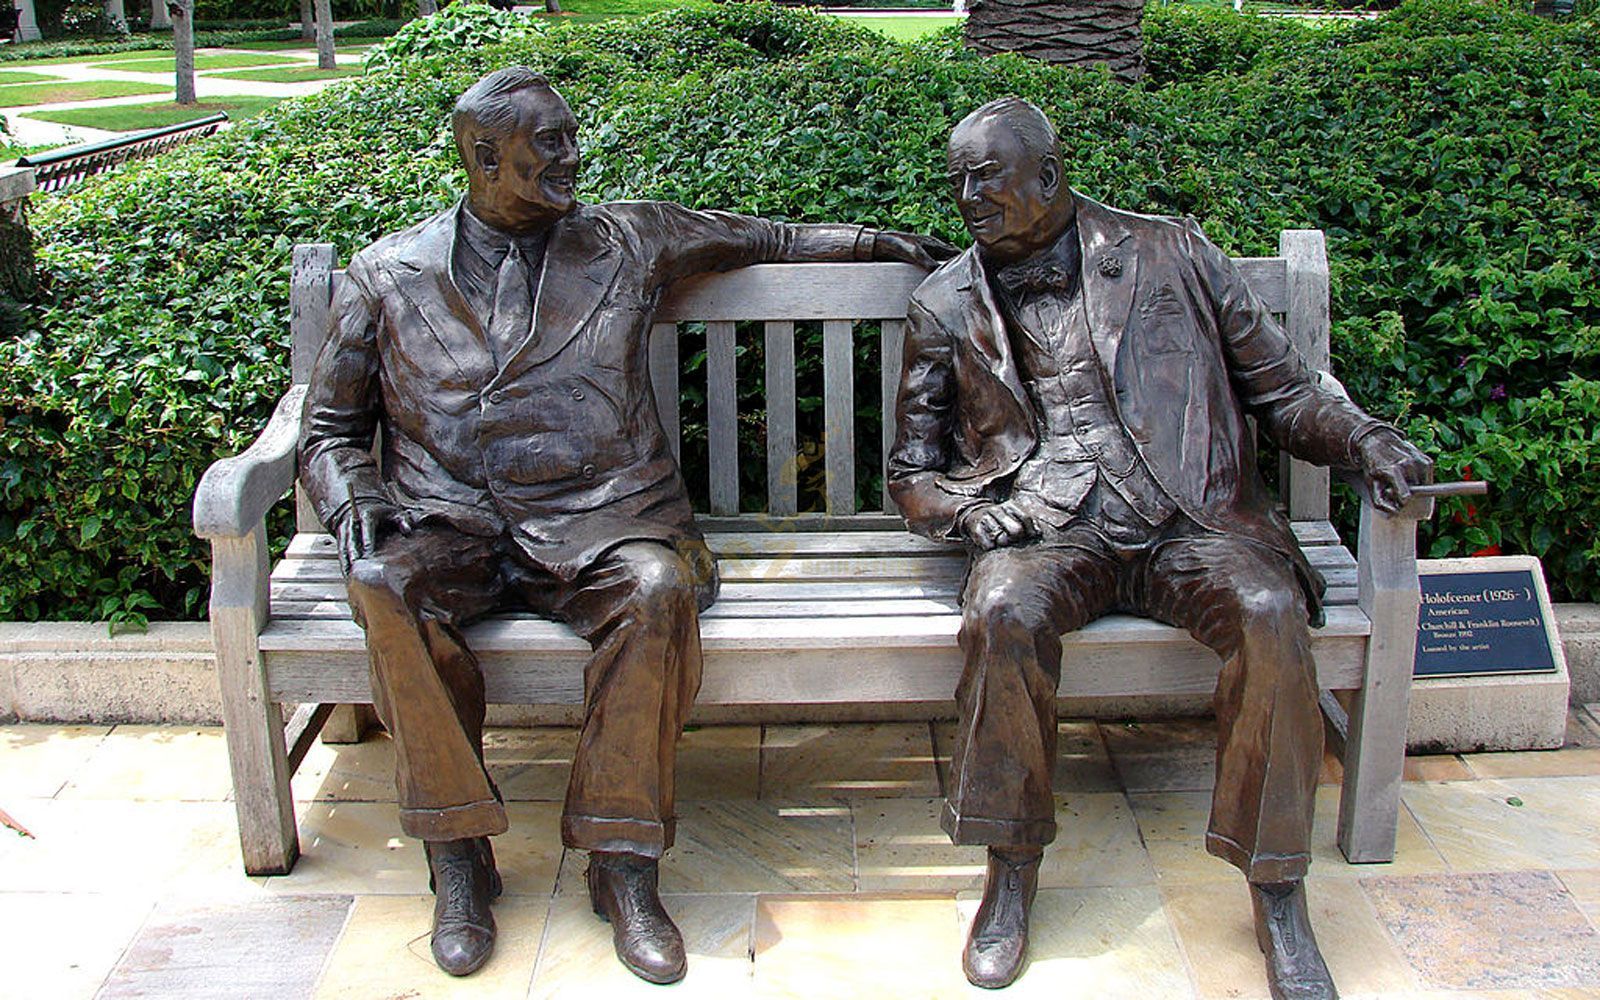 Life size city bronze statues two man siiting on the chair talking with each other